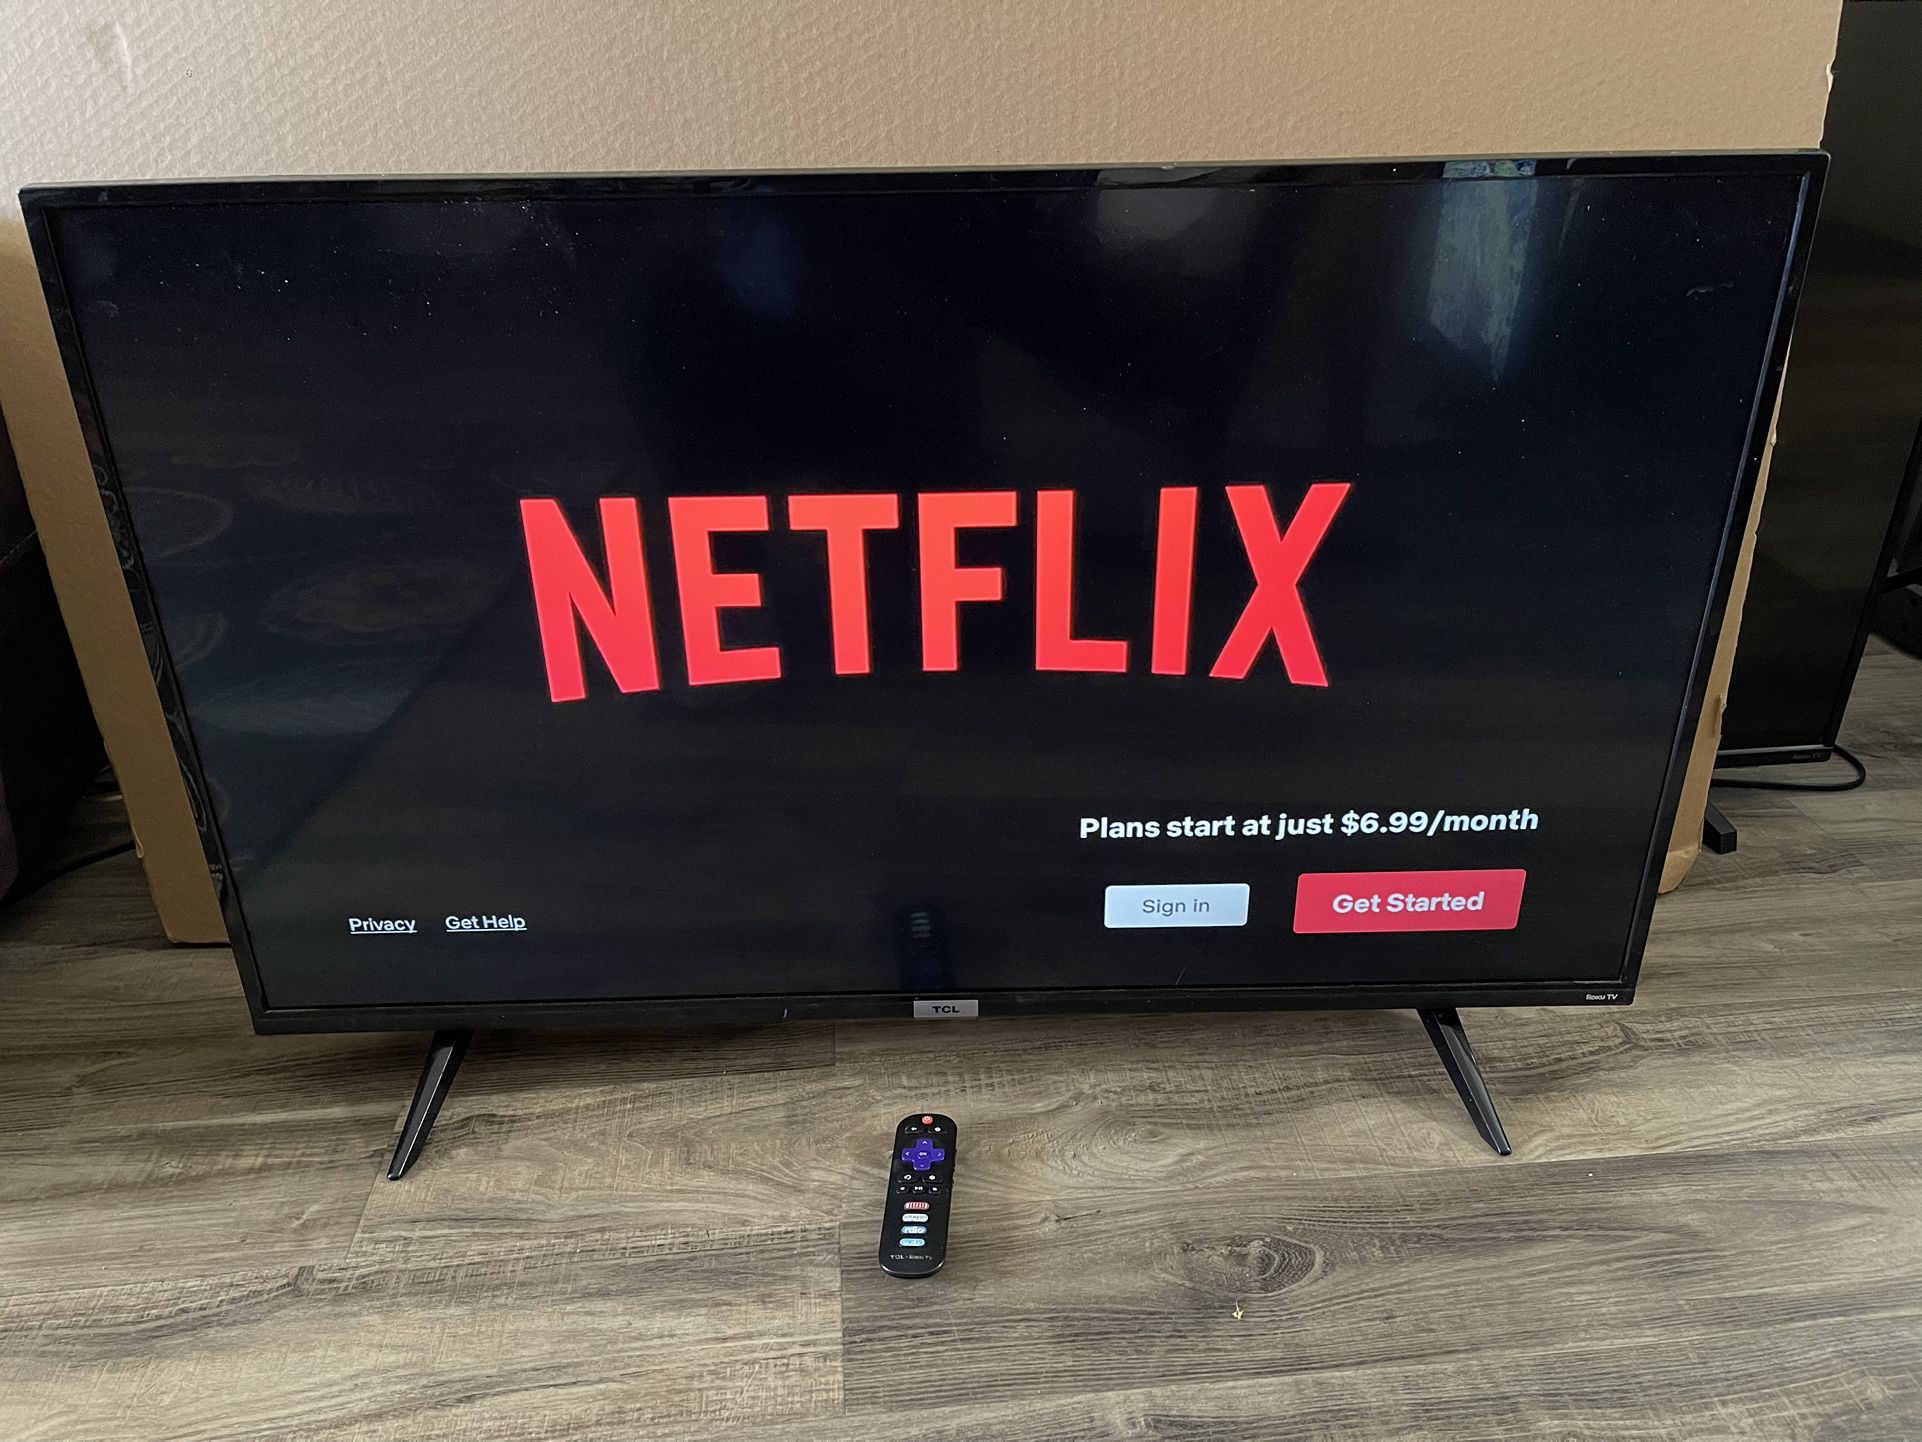 TCL 43” Roku Smart TV 4K UHD HDR In Working Condition With Remote Control Included. $120 Firm On Price